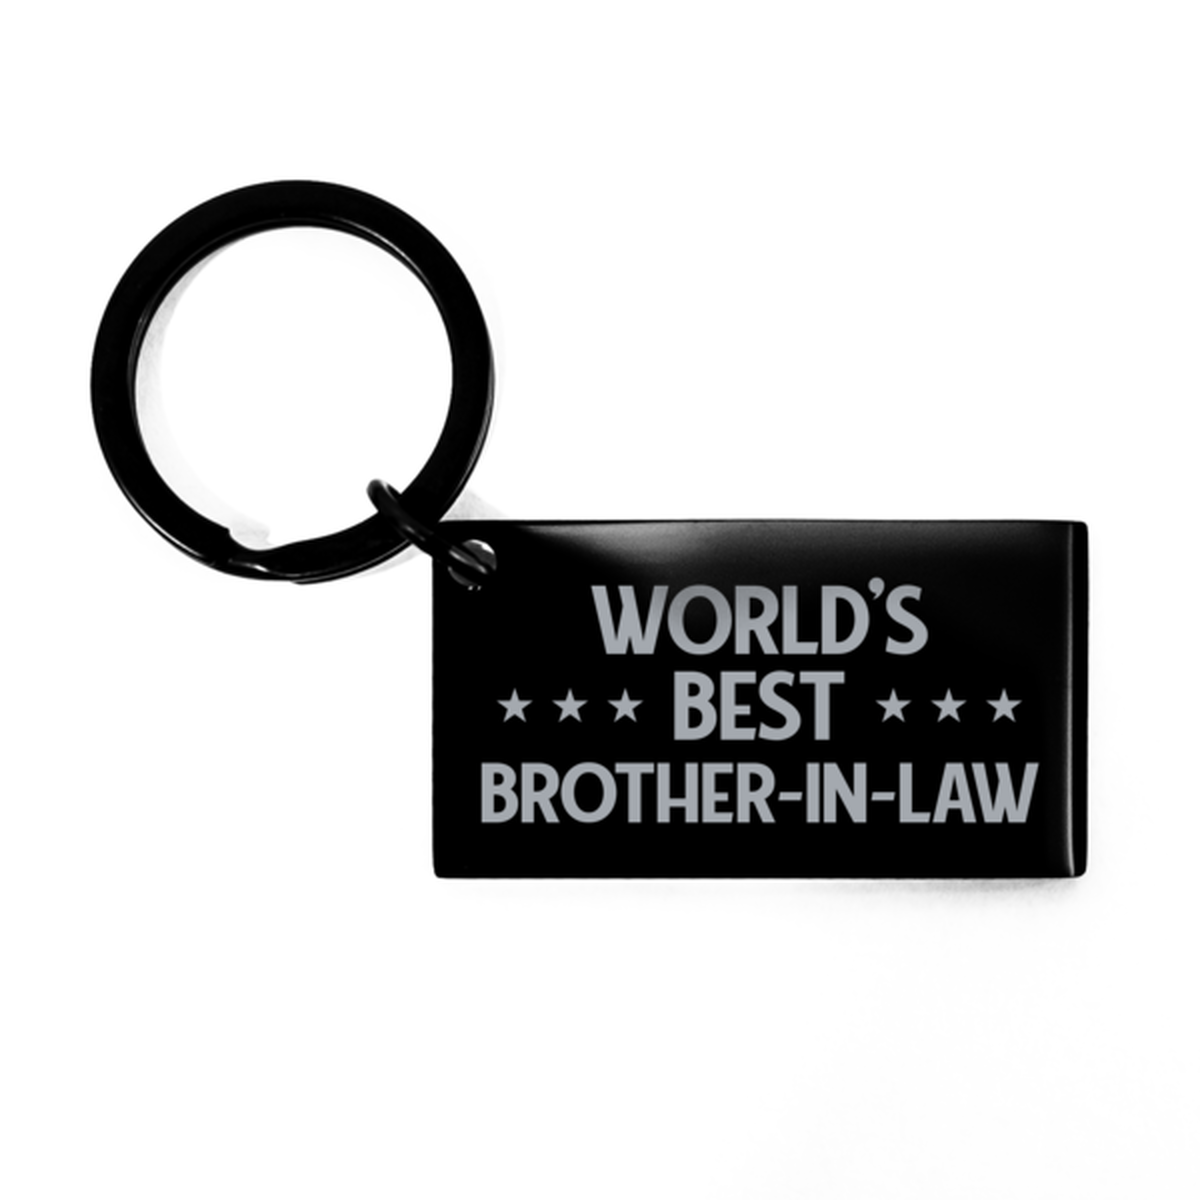 Worlds Best Brother-in-law Gifts, Funny Black Engraved Keychain For Brother-in-law, Birthday Presents For Men